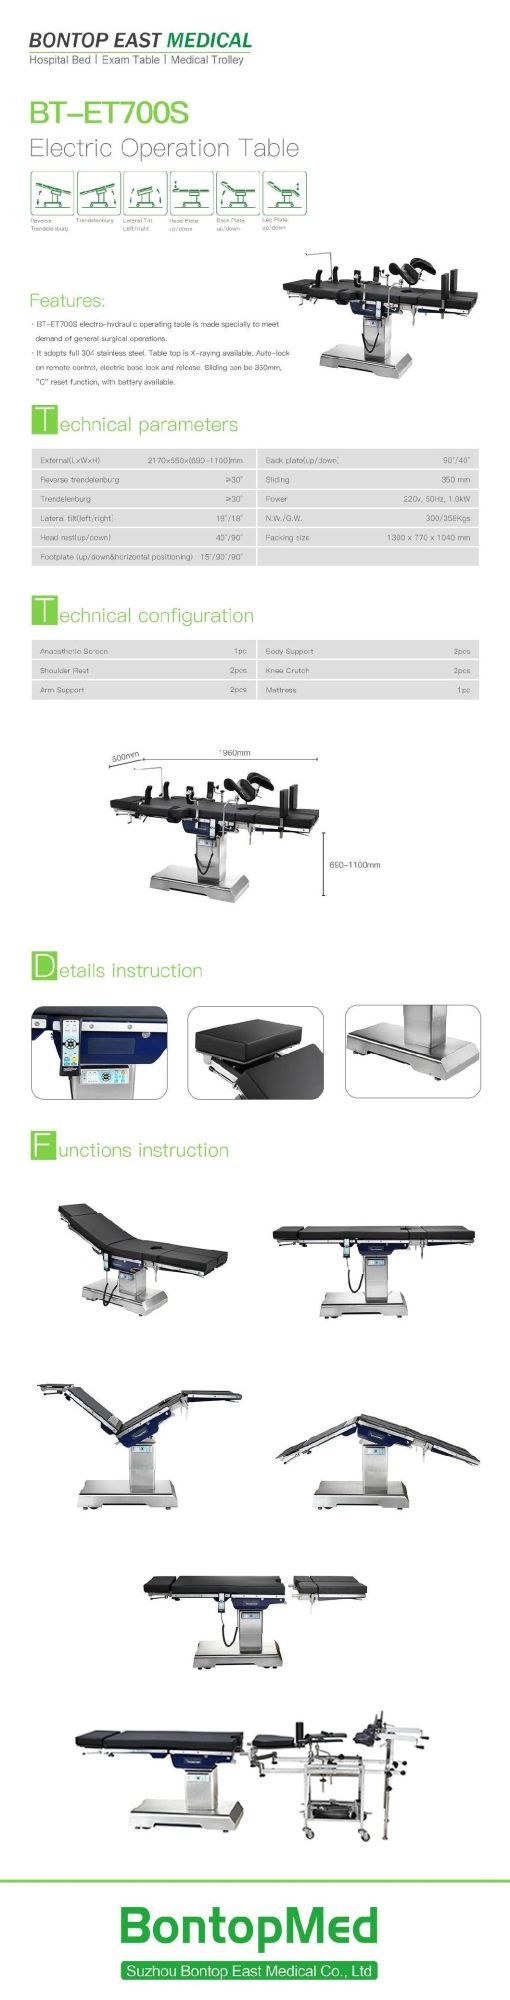 Hospital Operating Room Electric Operation Table Surgical Operating Table